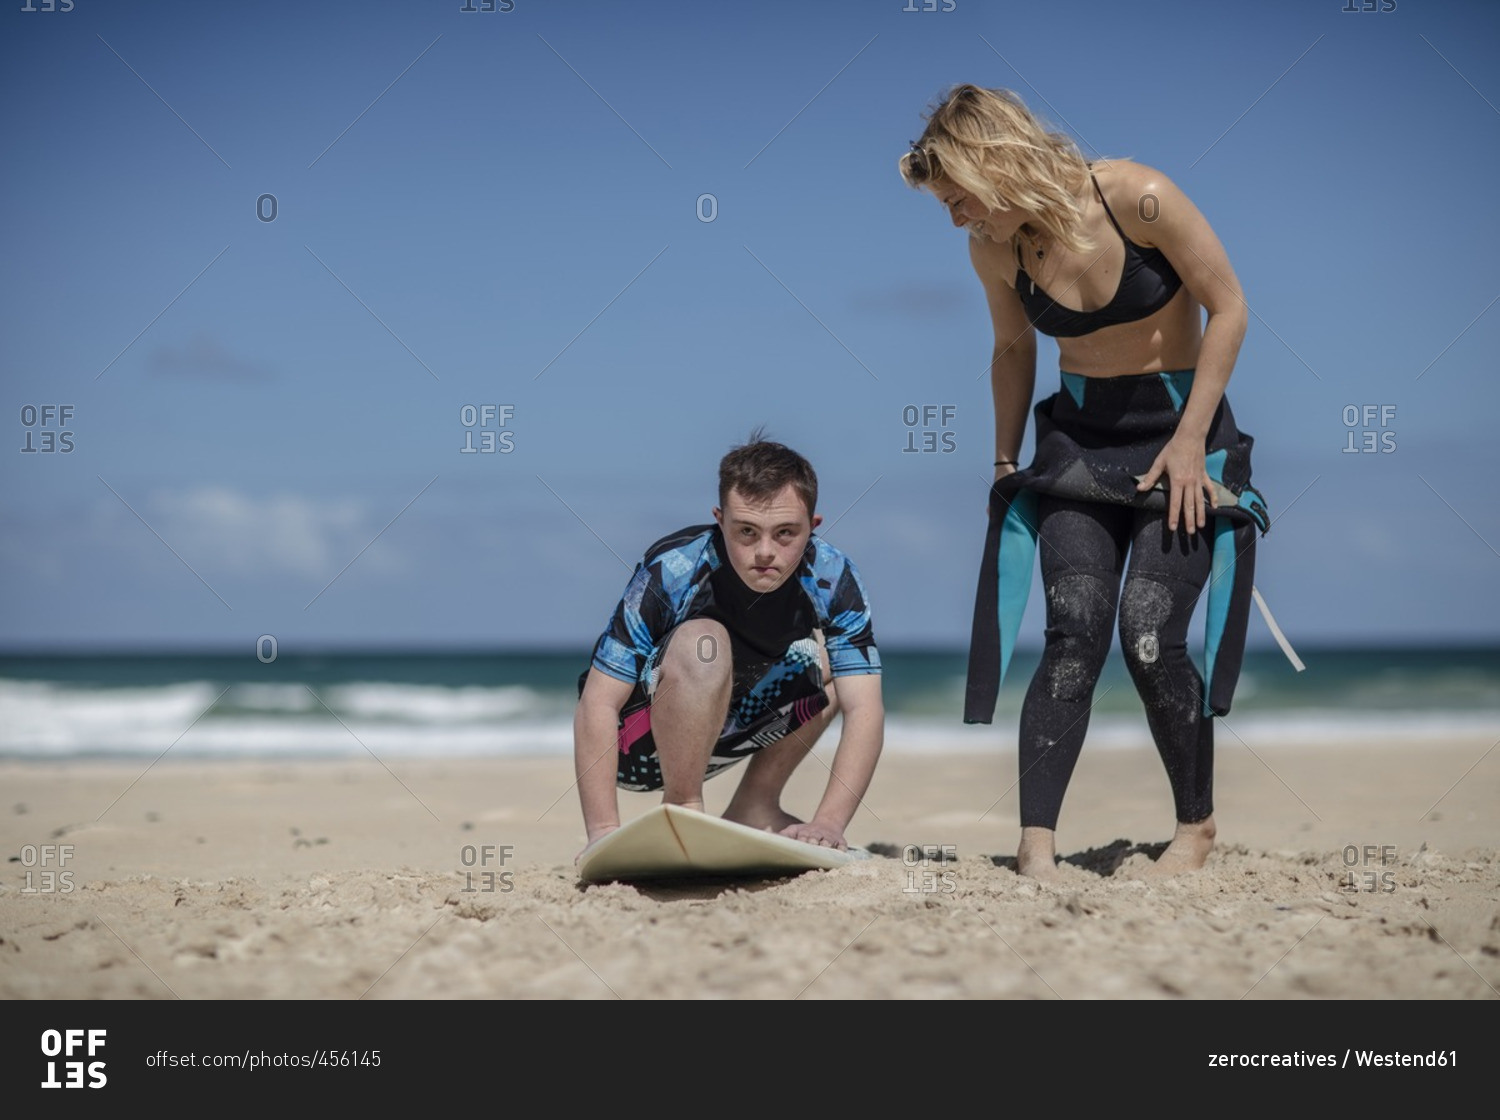 Teenage boy with down syndrome having surf lessons on beach